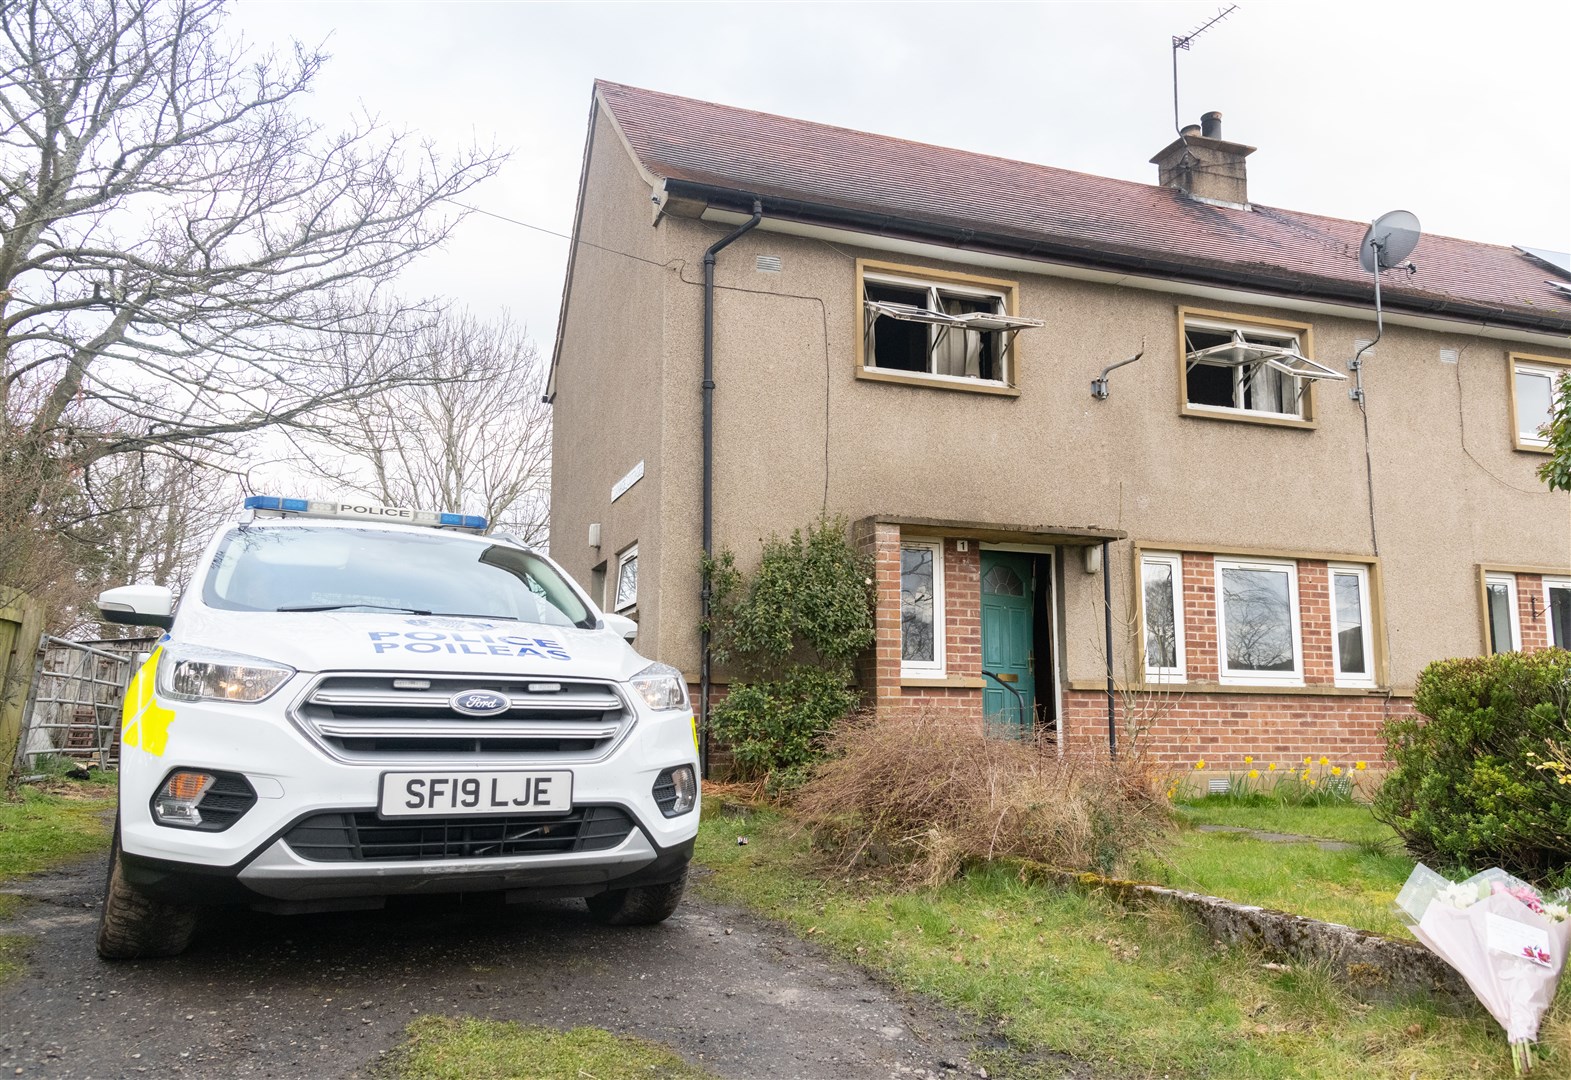 Police undertake investigations into the cause of a fire at Connages Cottage which claimed the life of a 74-year-old man. Picture: Beth Taylor